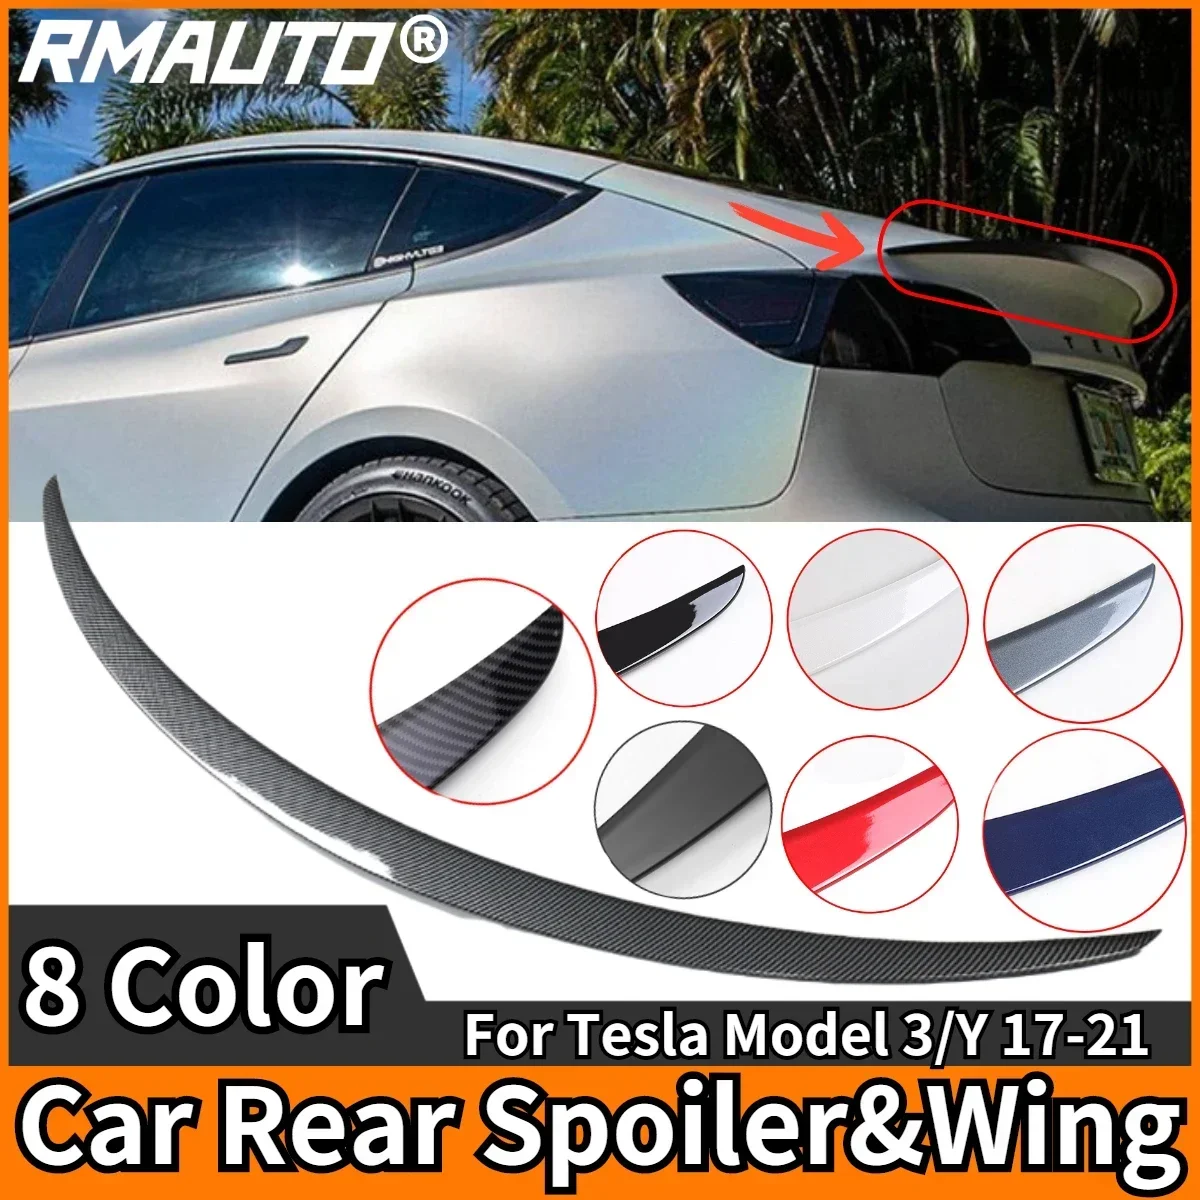 

RMAUTO Carbon Fiber Rear Trunk Spoiler Wing Performance Type For Tesla Model 3 2017-2021 Model Y 2021 Car Accessories Body Kit